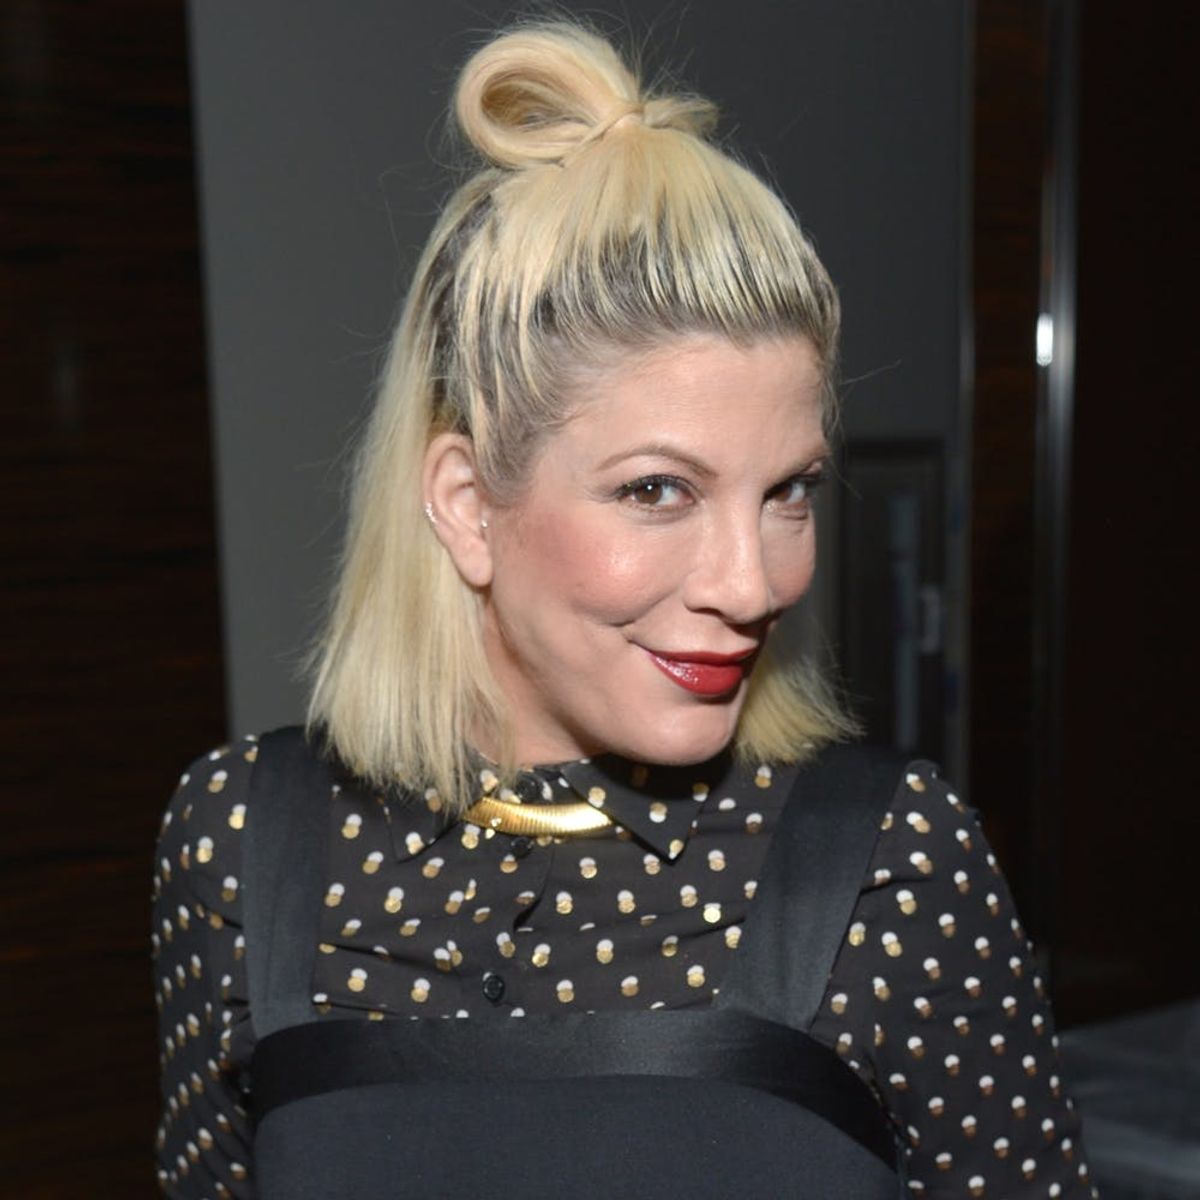 Tori Spelling Is Riding the Hair Color Rainbow With New Amethyst Locks